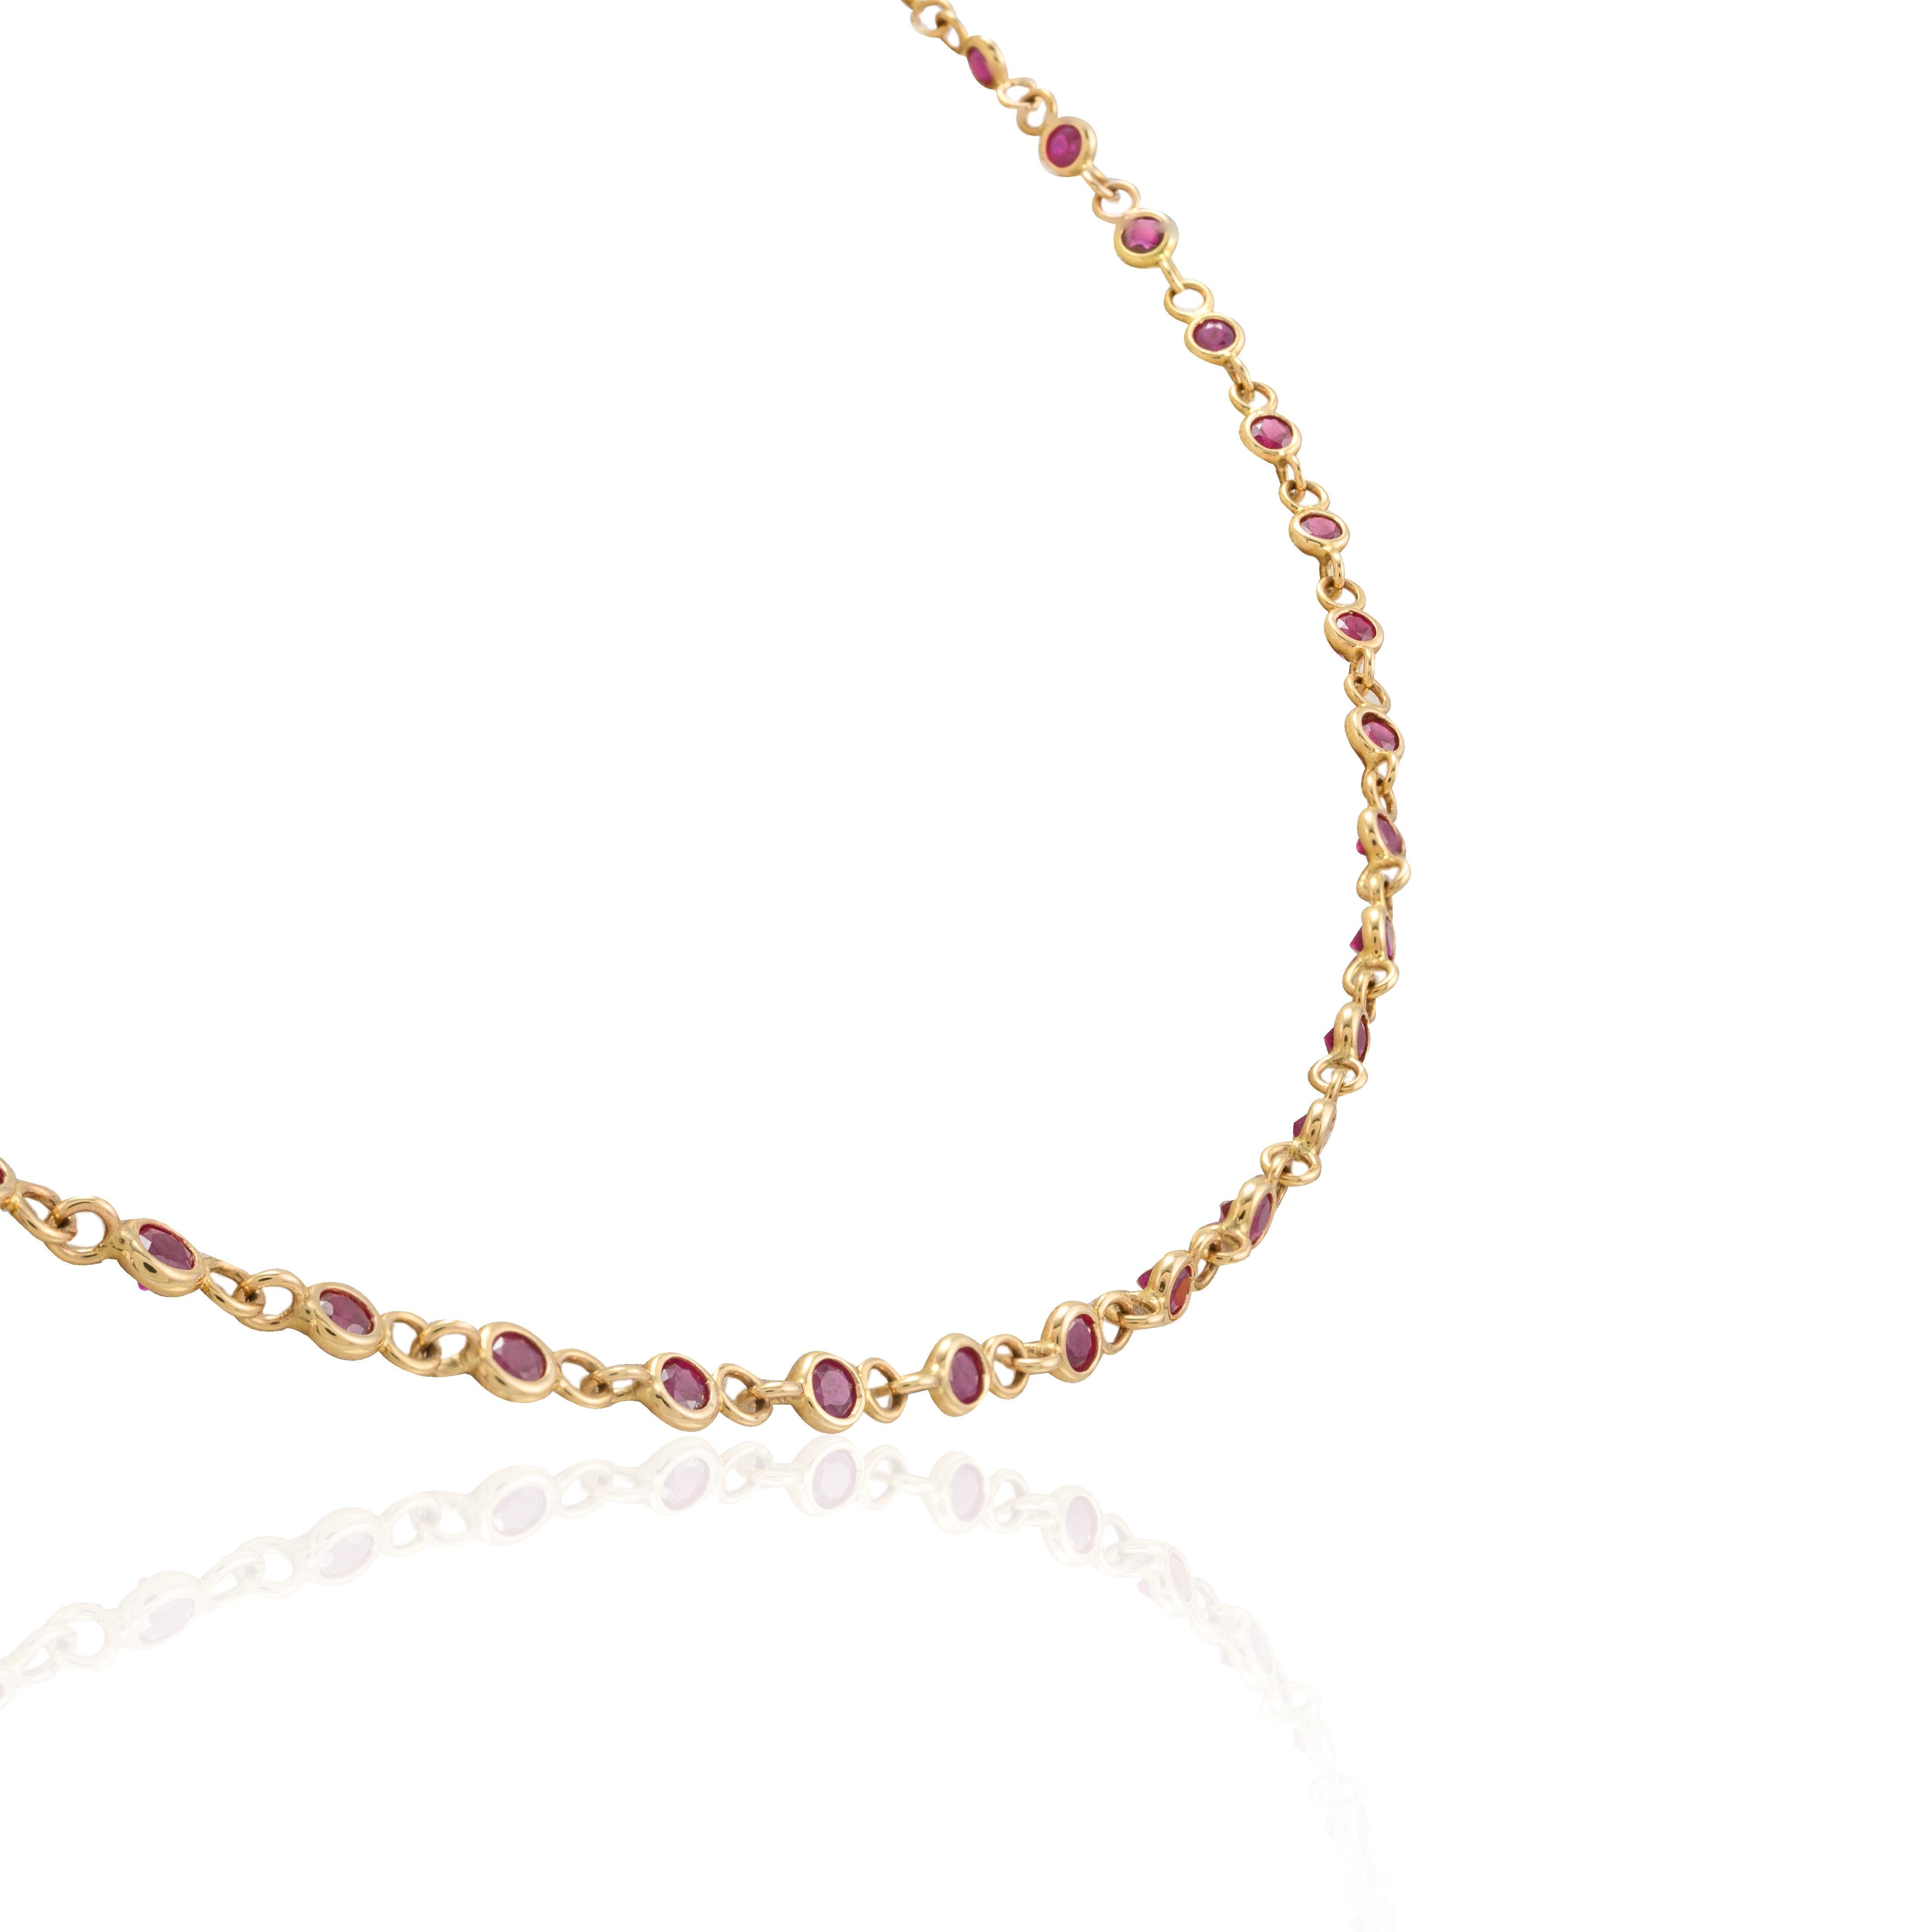 Handmade Ruby Station Chain Necklace in 14K Gold studded with round cut ruby studded all over the chain. This stunning piece of jewelry instantly elevates a casual look or dressy outfit. 
Ruby improves mental strength. 
Designed with a round cut